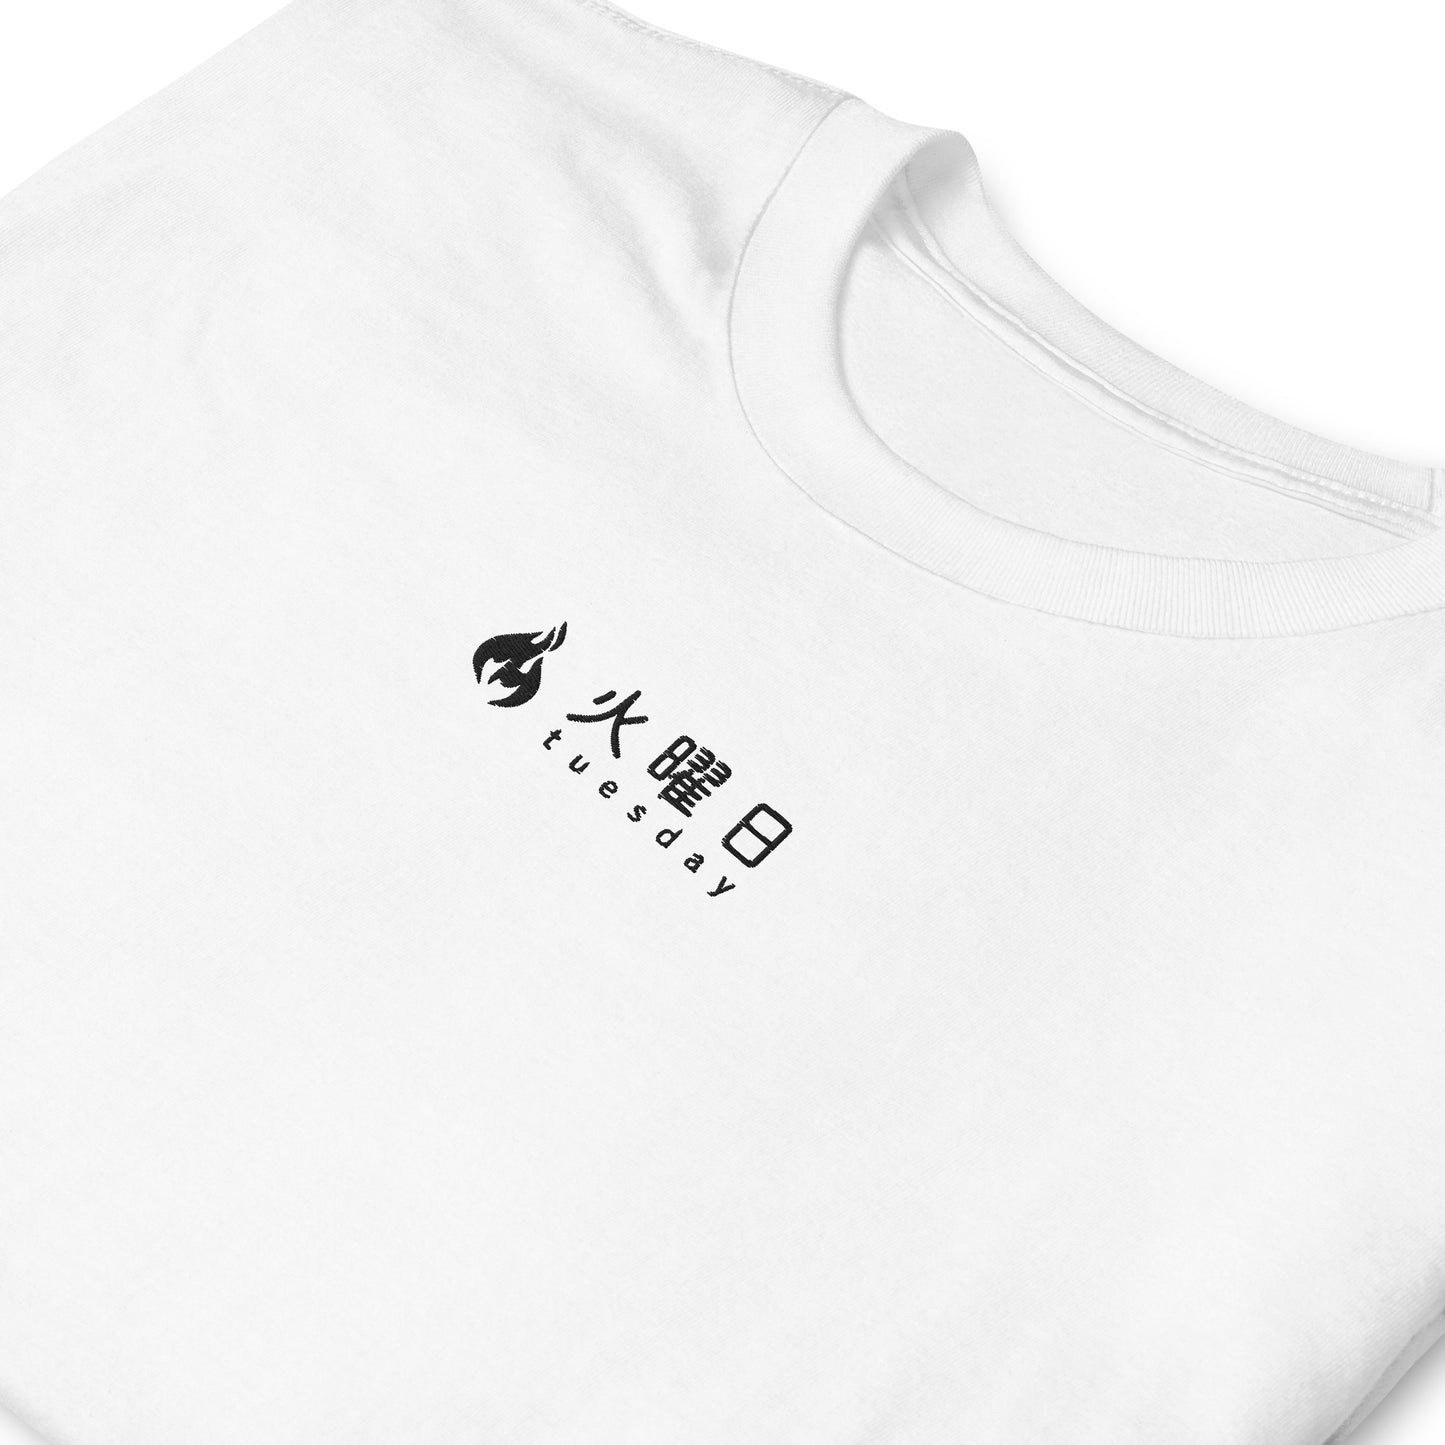 White High Quality Tee - Front Design with an Black embroidery "Tuesday" in Japanese and English